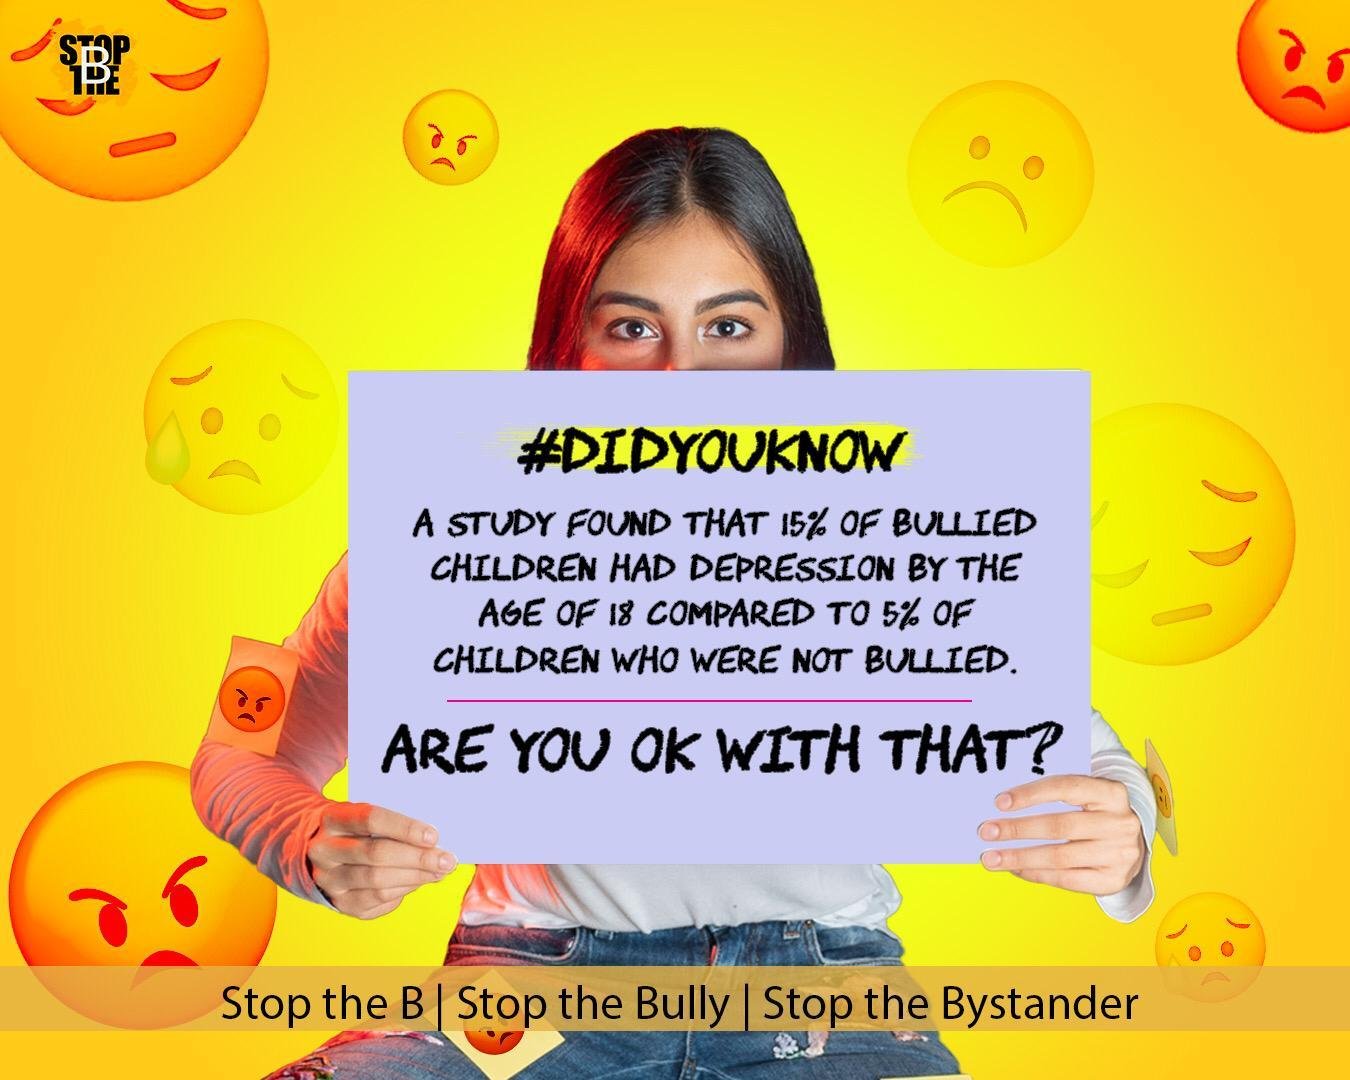 Anti-Bullying Campaign